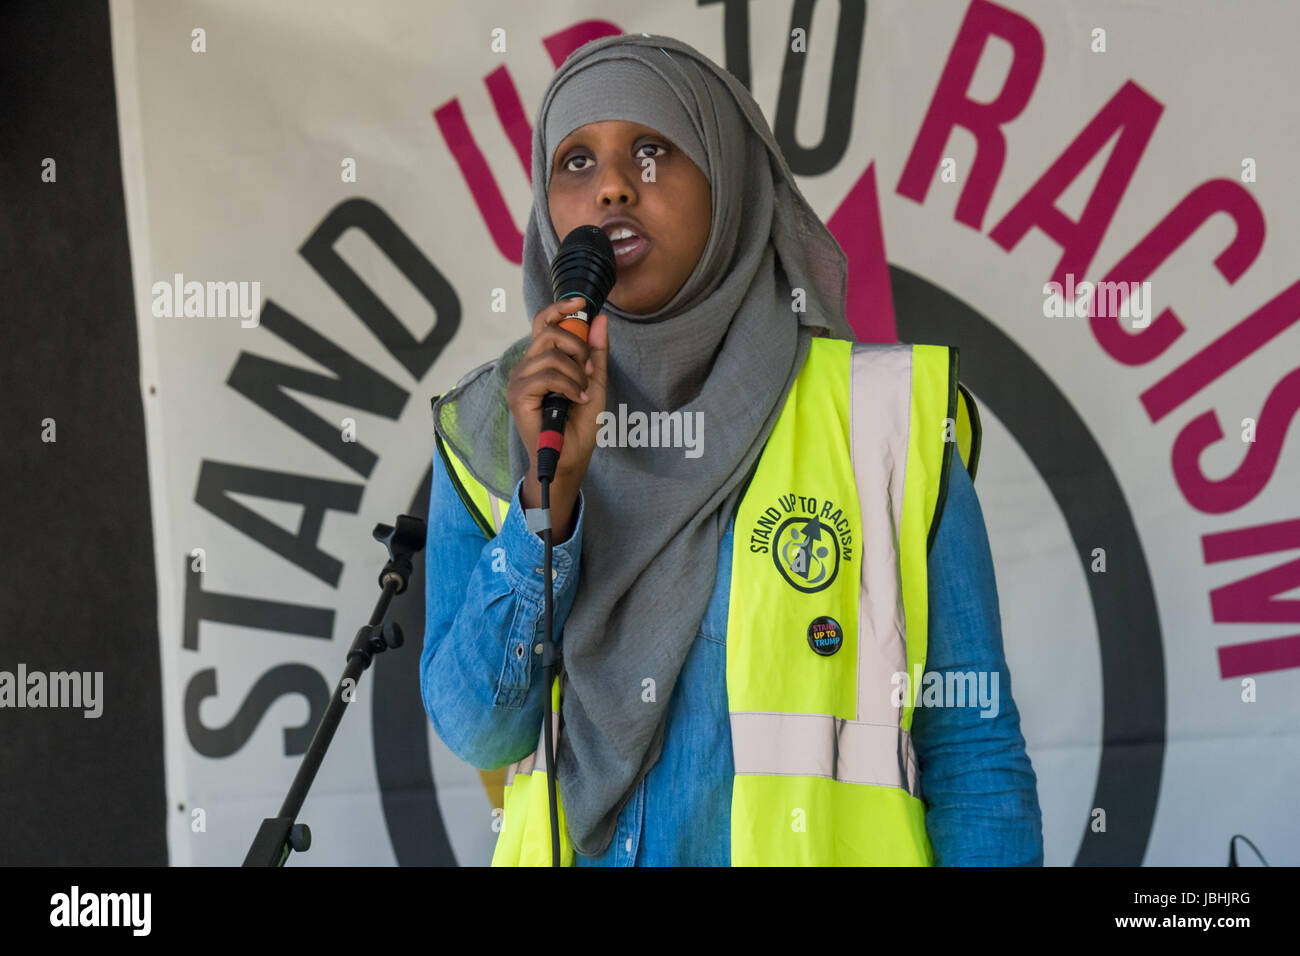 June 10, 2017 - London, UK - London, UK. 10th June 2017. A young Muslim woman who stood up to UKP leader Paul Nuttal over the rigth to wear what she wants speaks at the rally in Parliament Square with speeches, music and dancing celebrating the remarkable performance against all the odds made by Labour led by Jeremy Corbyn in the General Election. They call for support for him inside and outside the Labour Party and for the fight for Labour values to continue and for all Labour MPs to get behind a leader who has shown he can grow the Labour vote. Speakers called for Theresa May to go, and expr Stock Photo